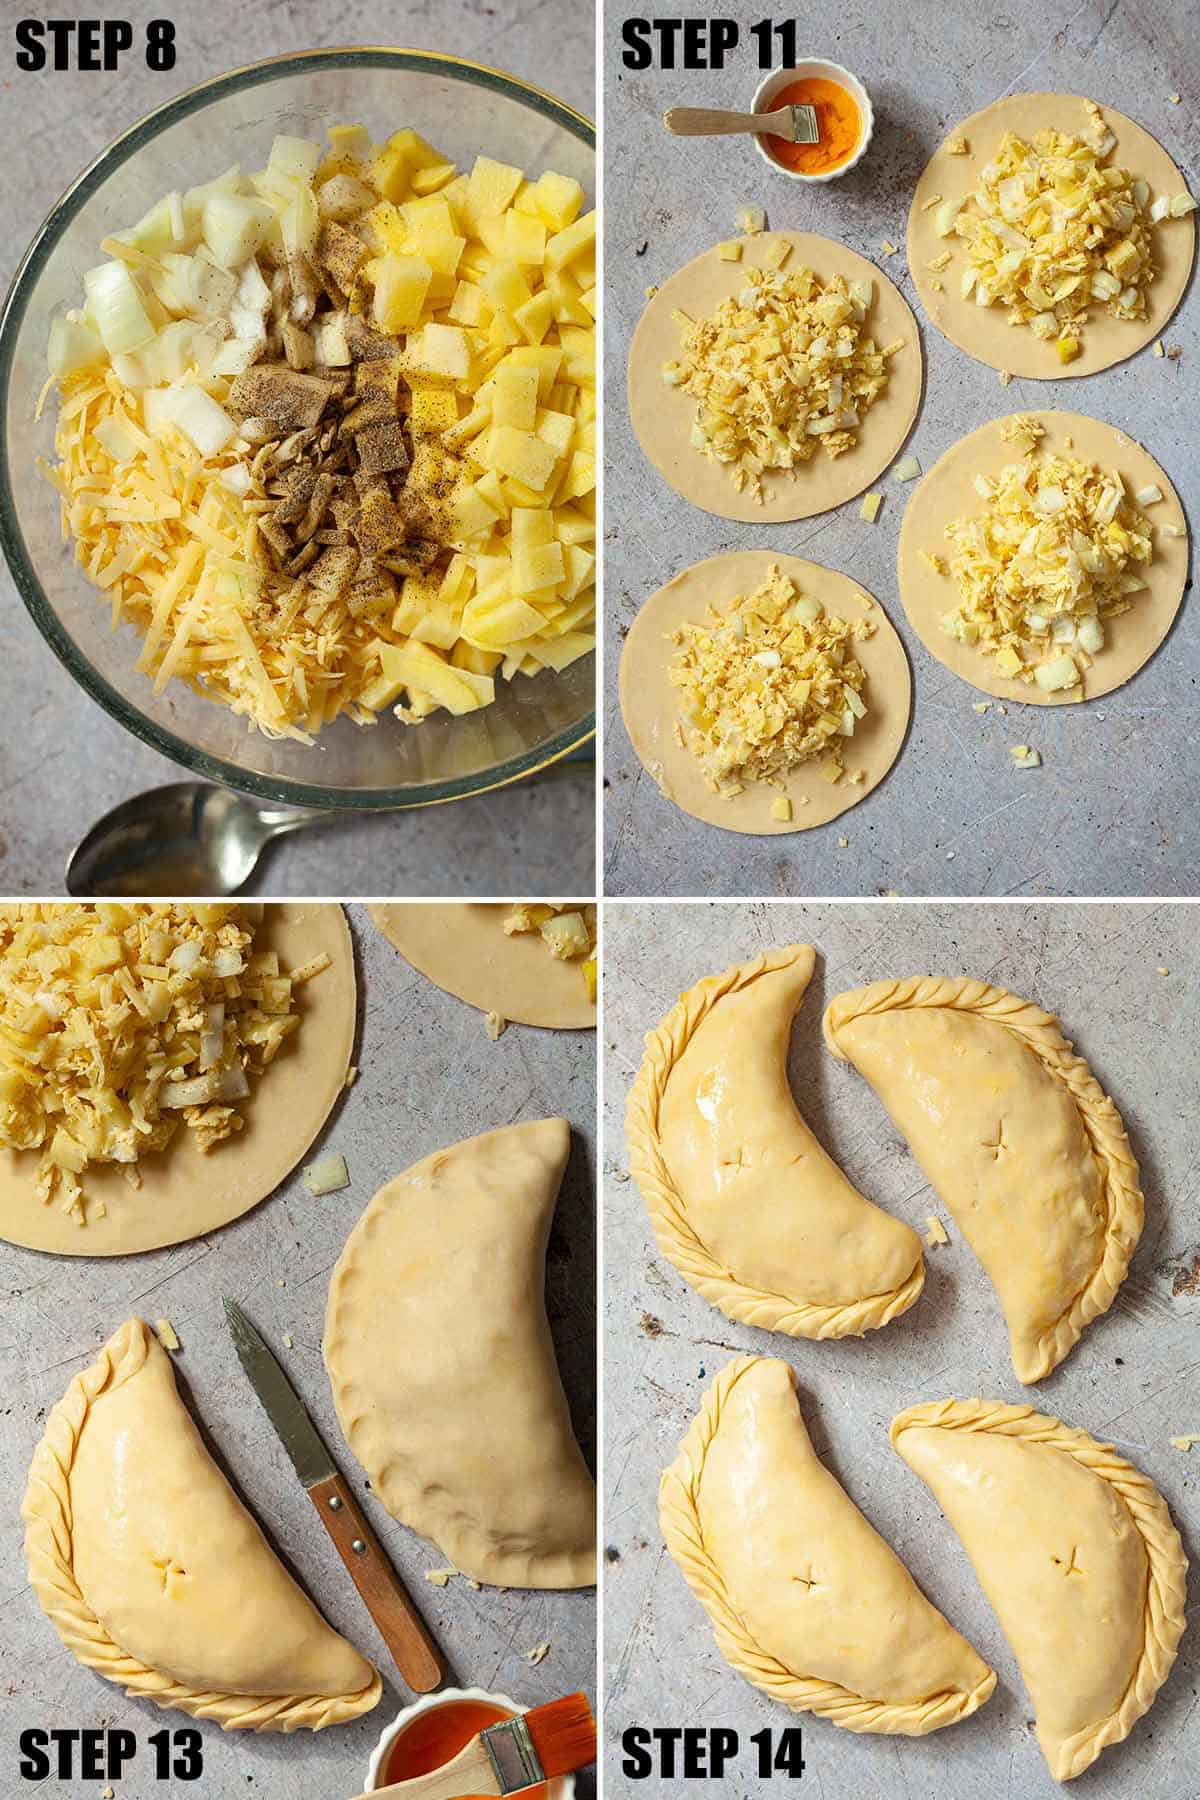 Collage of images showing a vegetarian pasty recipe being made.